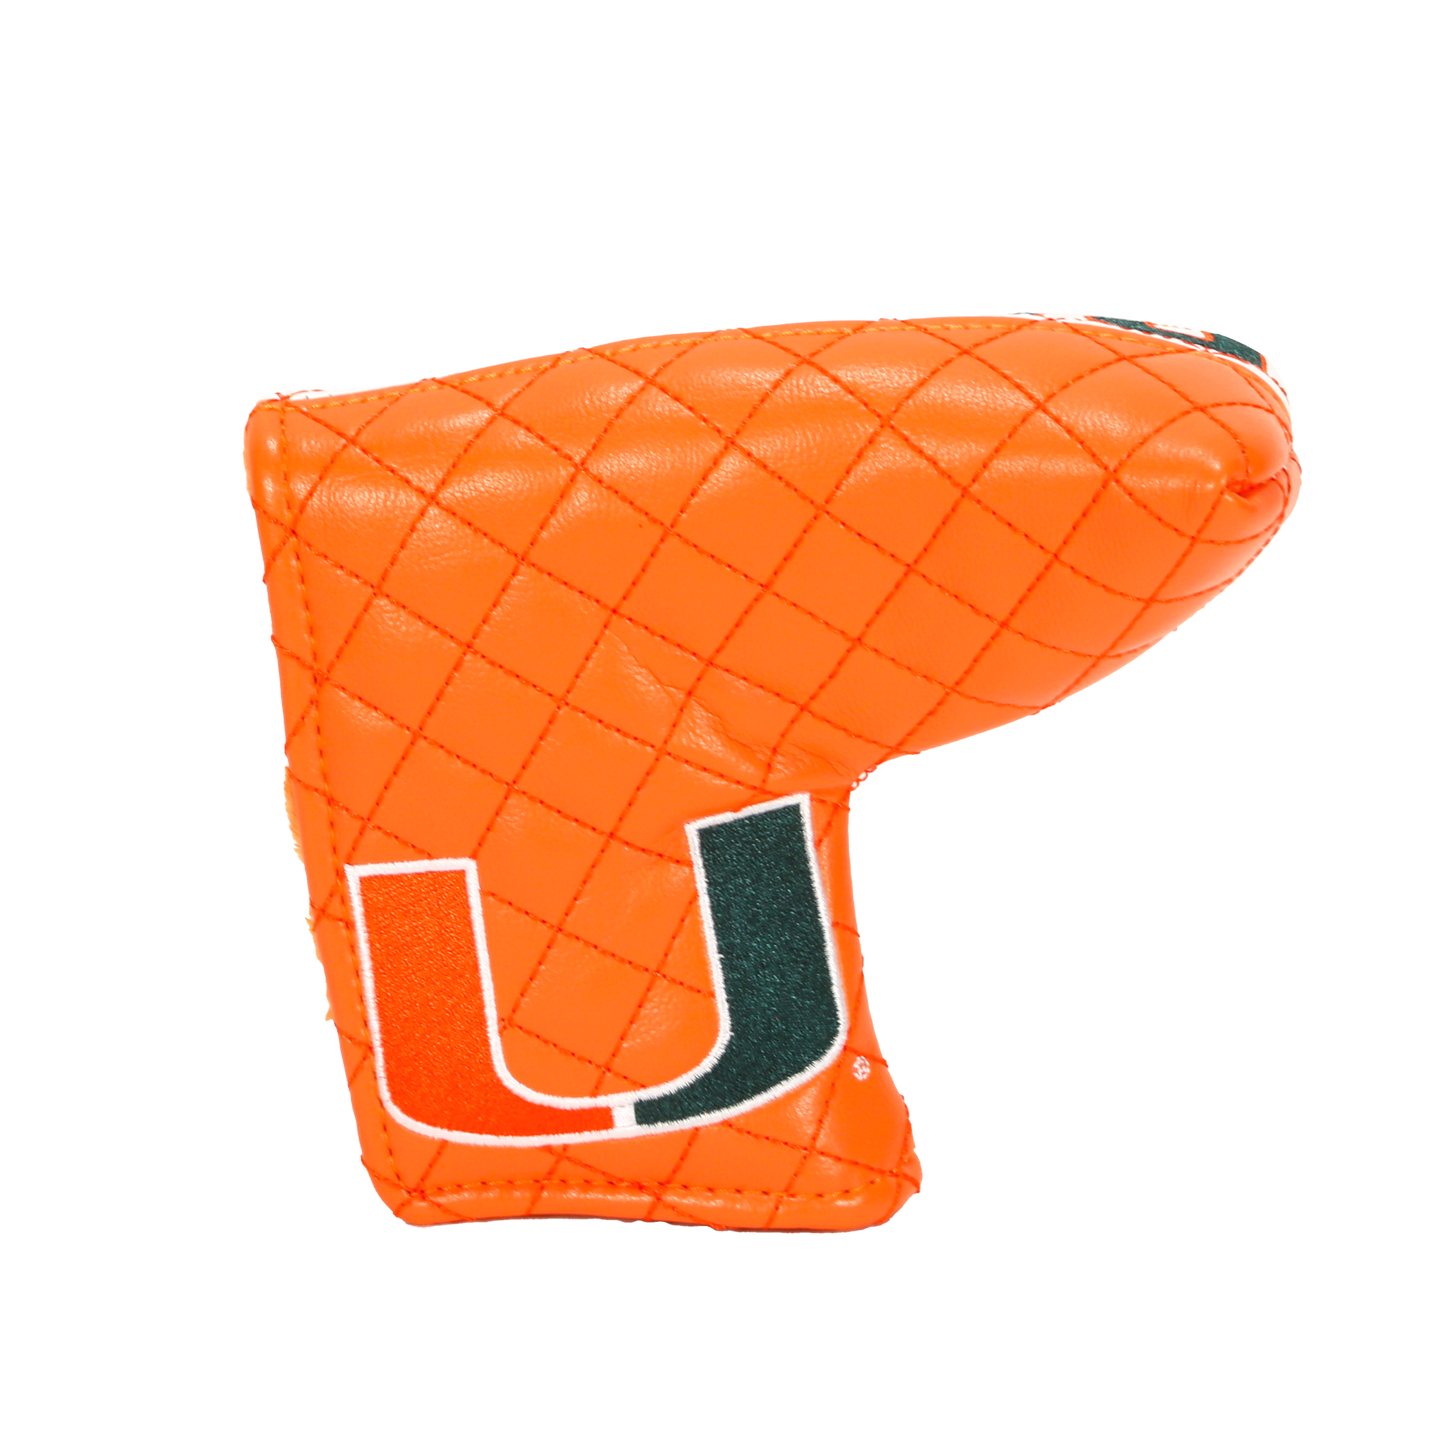 Miami "Canes" Blade Putter Cover